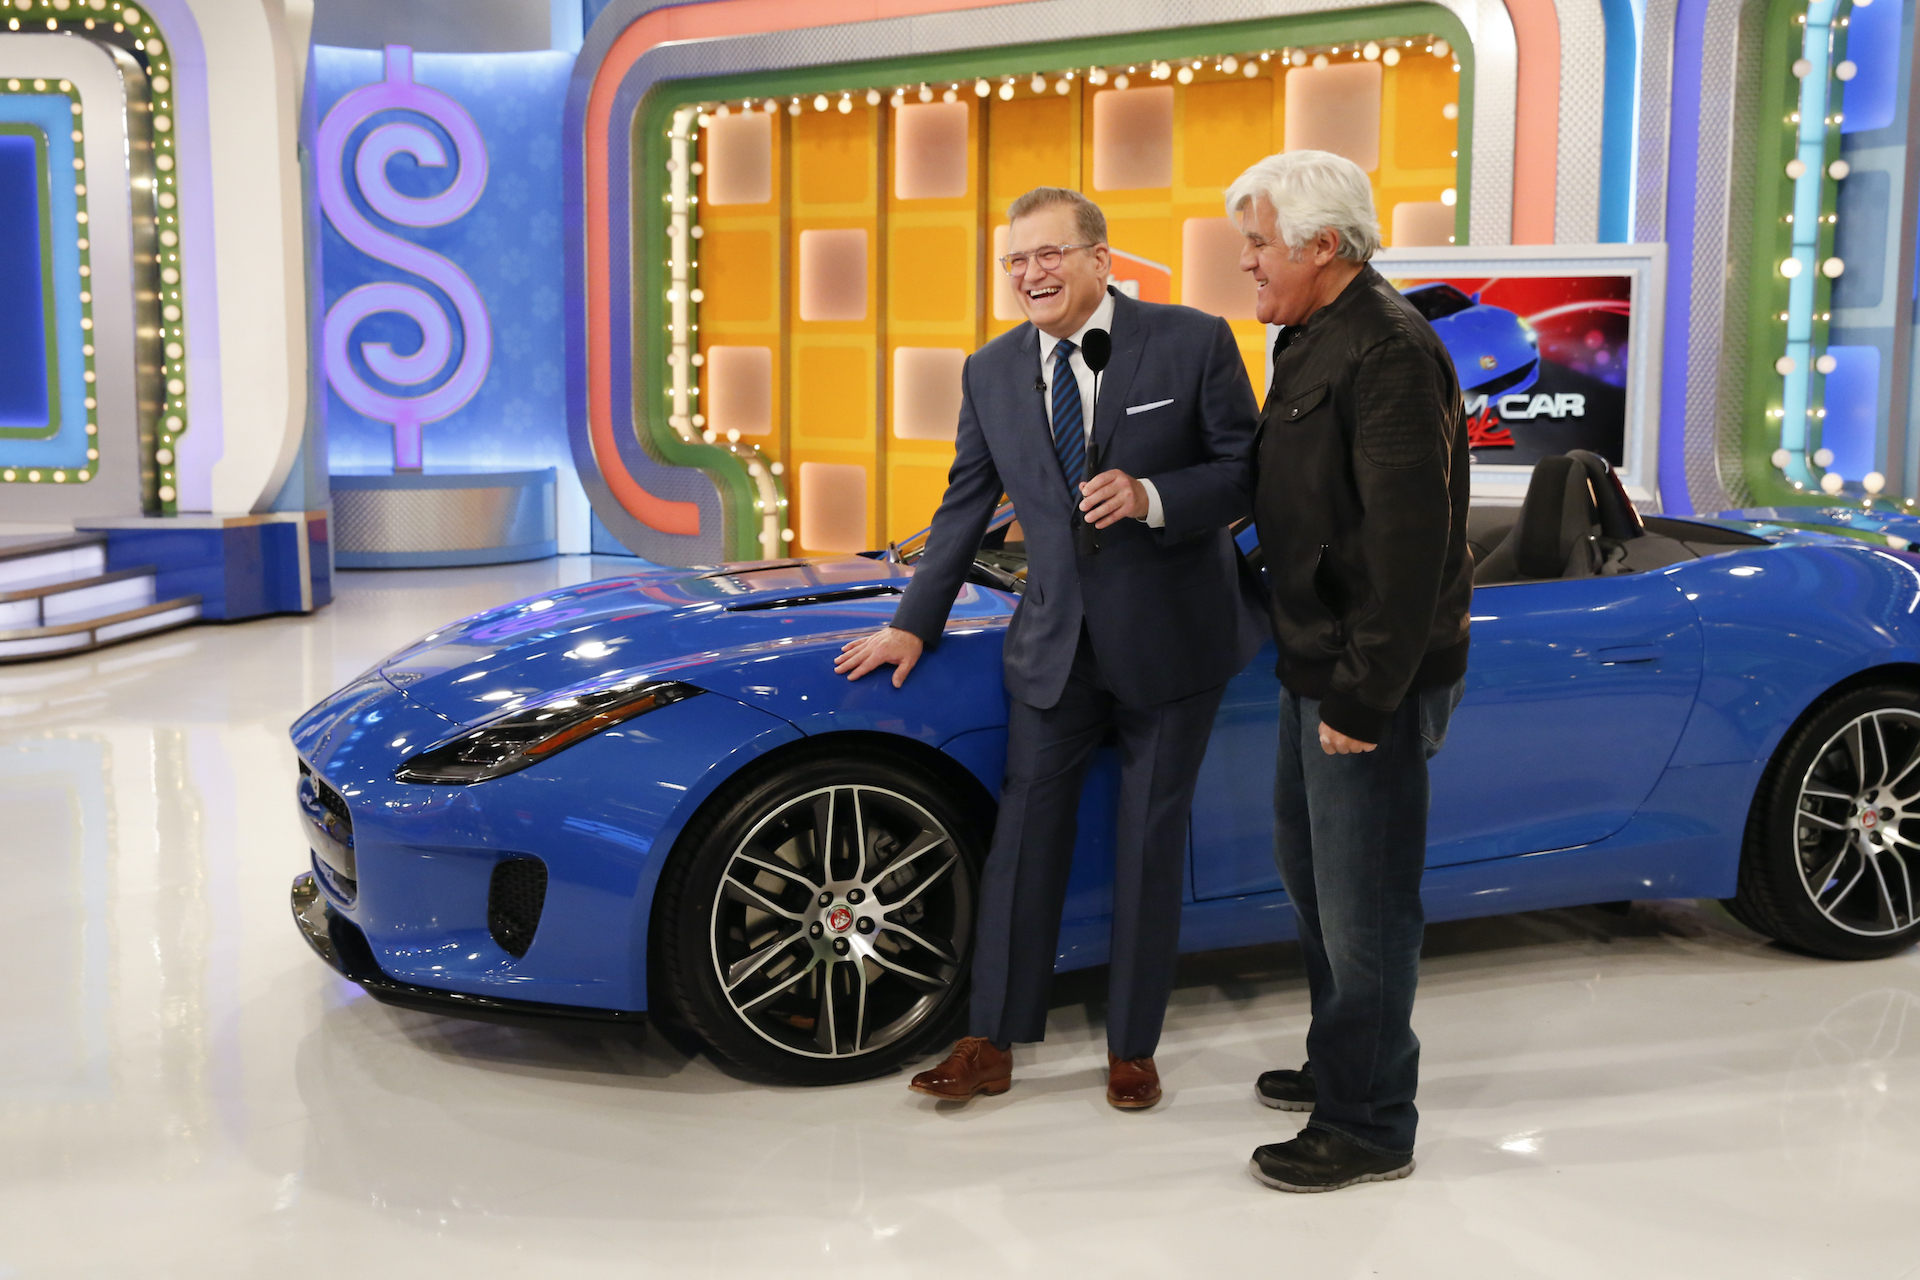 What it’s like to win a new car during “The Price Is Right” Dream Car Week